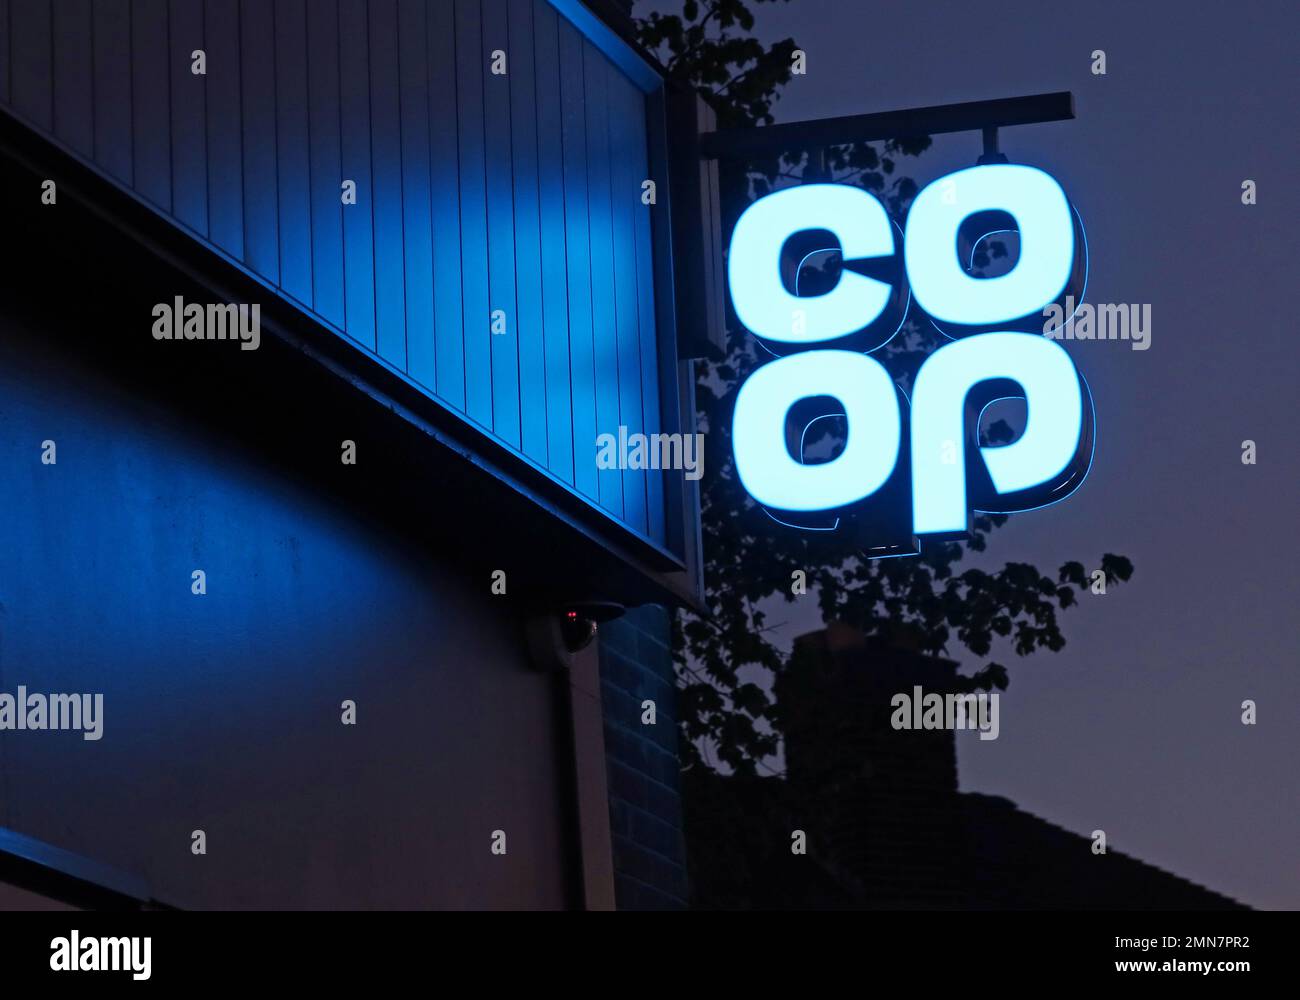 Blue CO-OP sign, convenience supermarket, 156 Knutsford Road,  Grappenhall, Warrington, Cheshire, England, UK, WA4 2QU Stock Photo